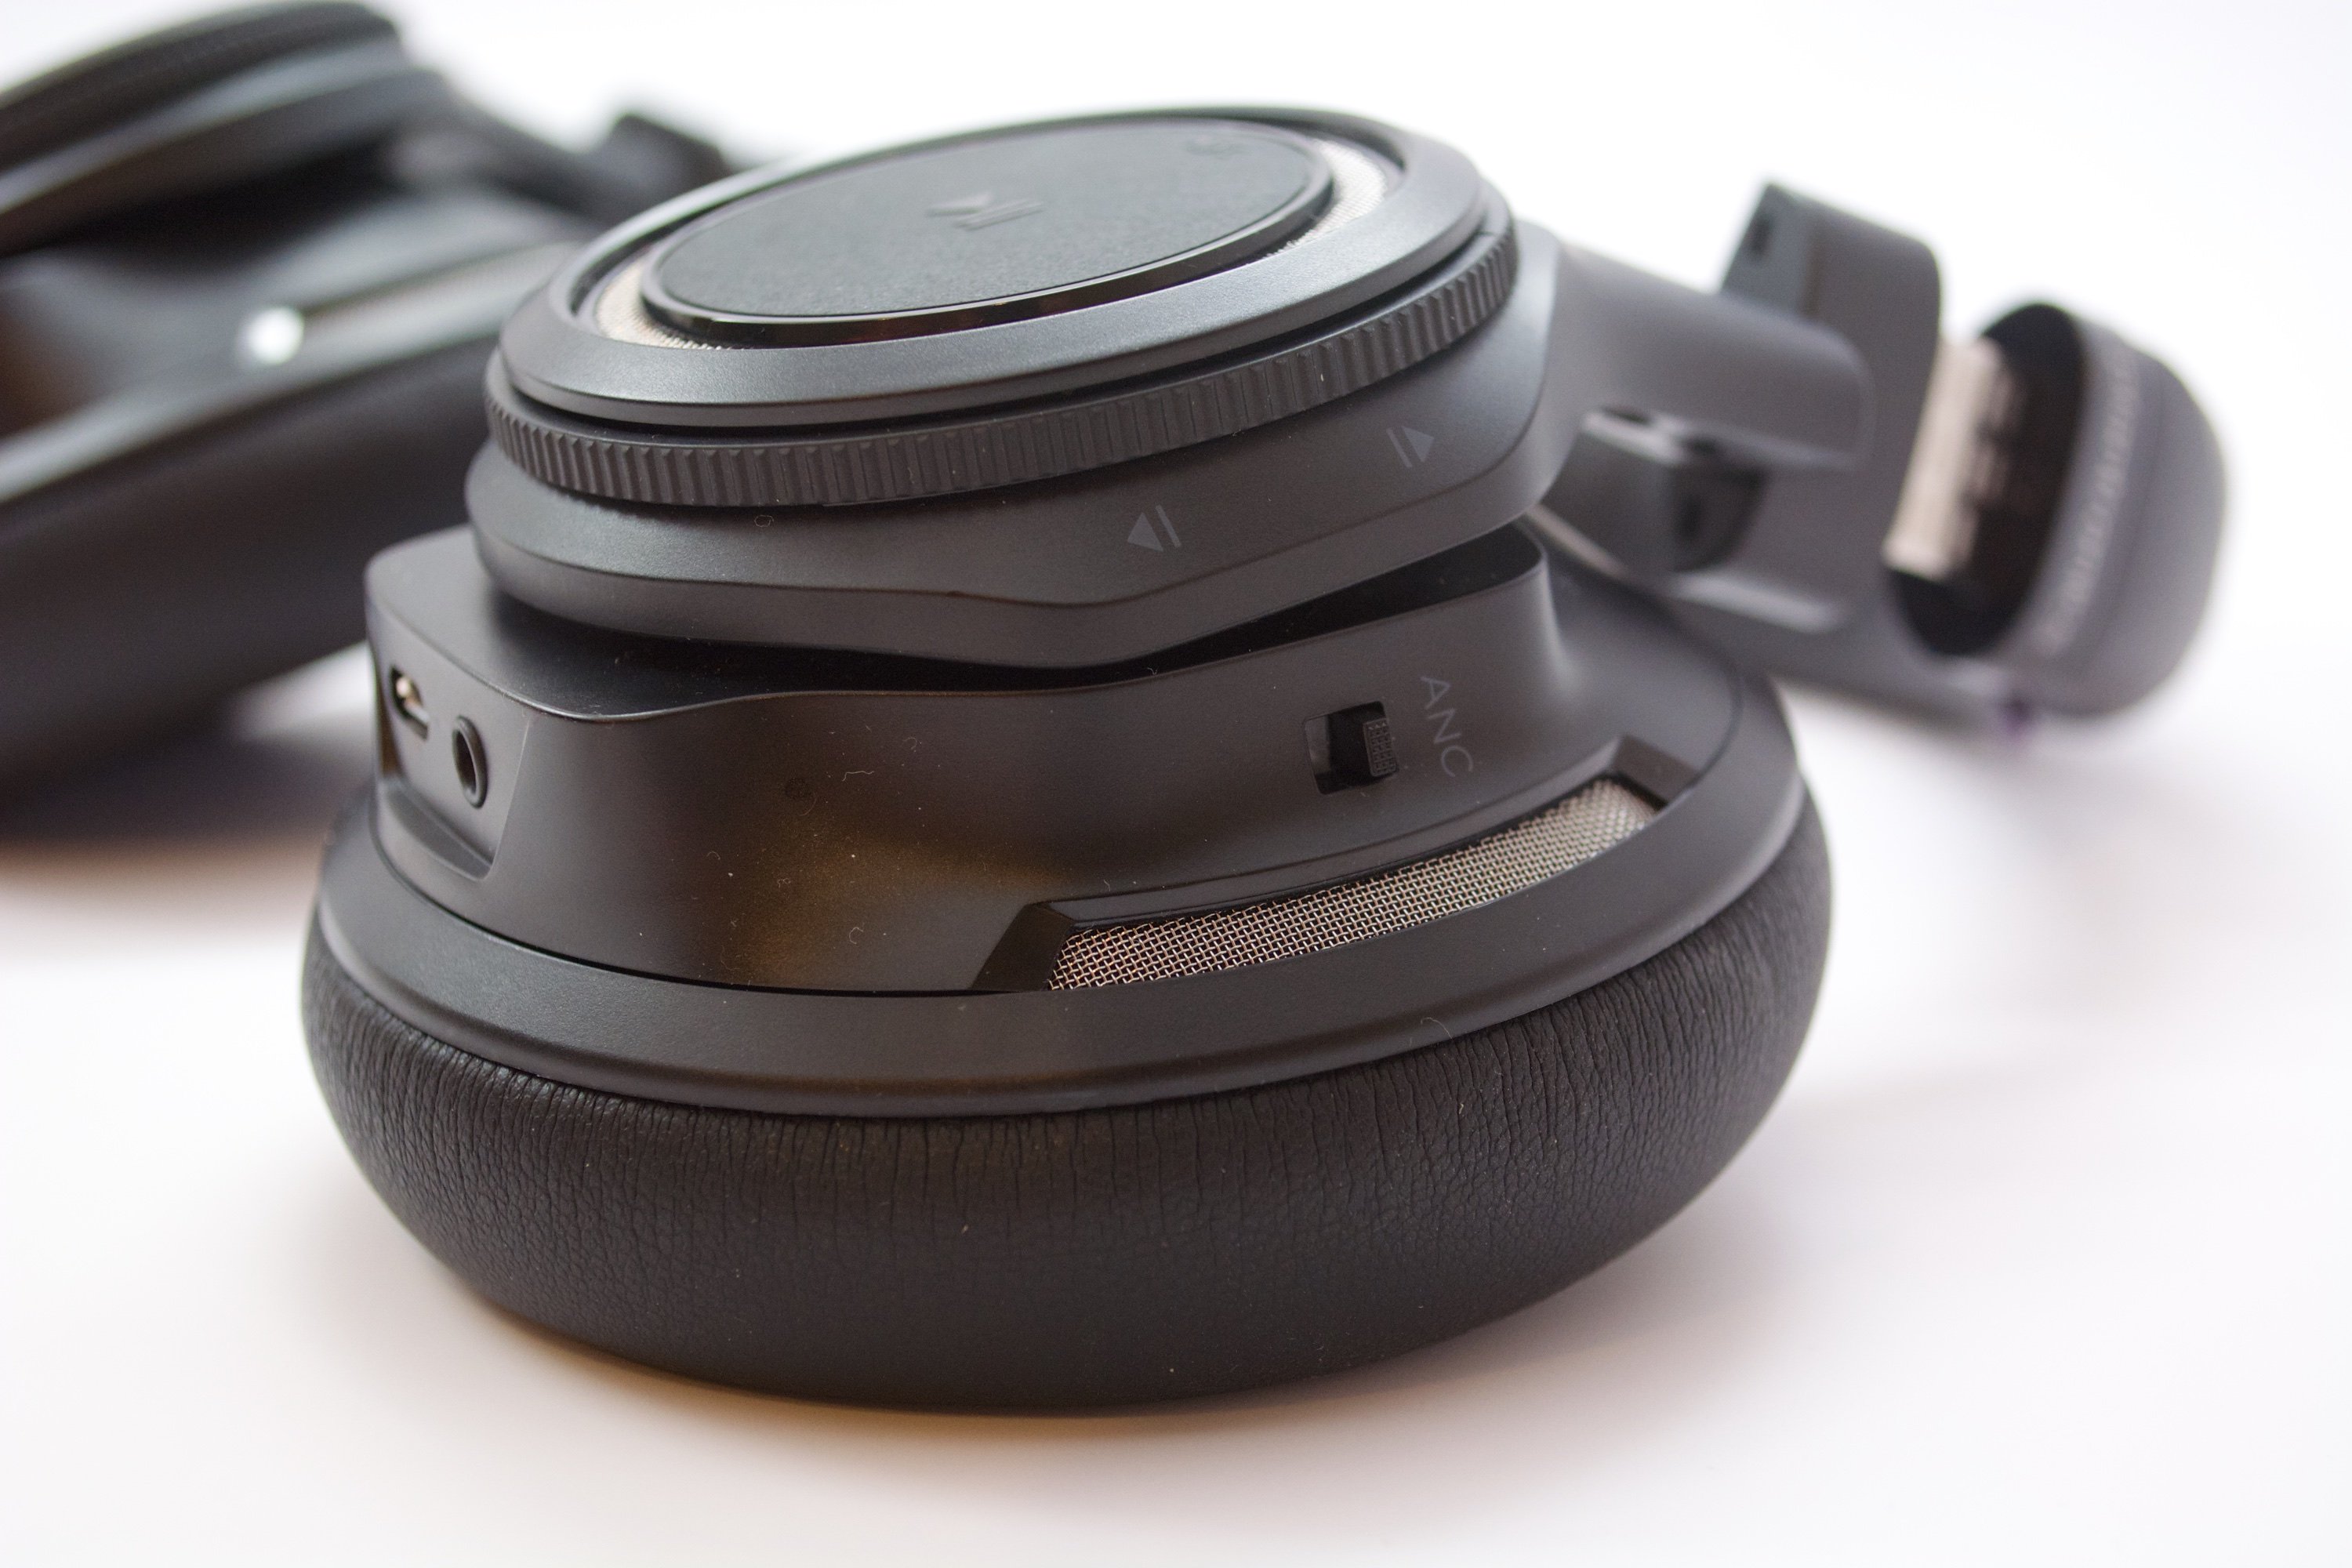 Controls on the ear cups make it easy to change volume or track.